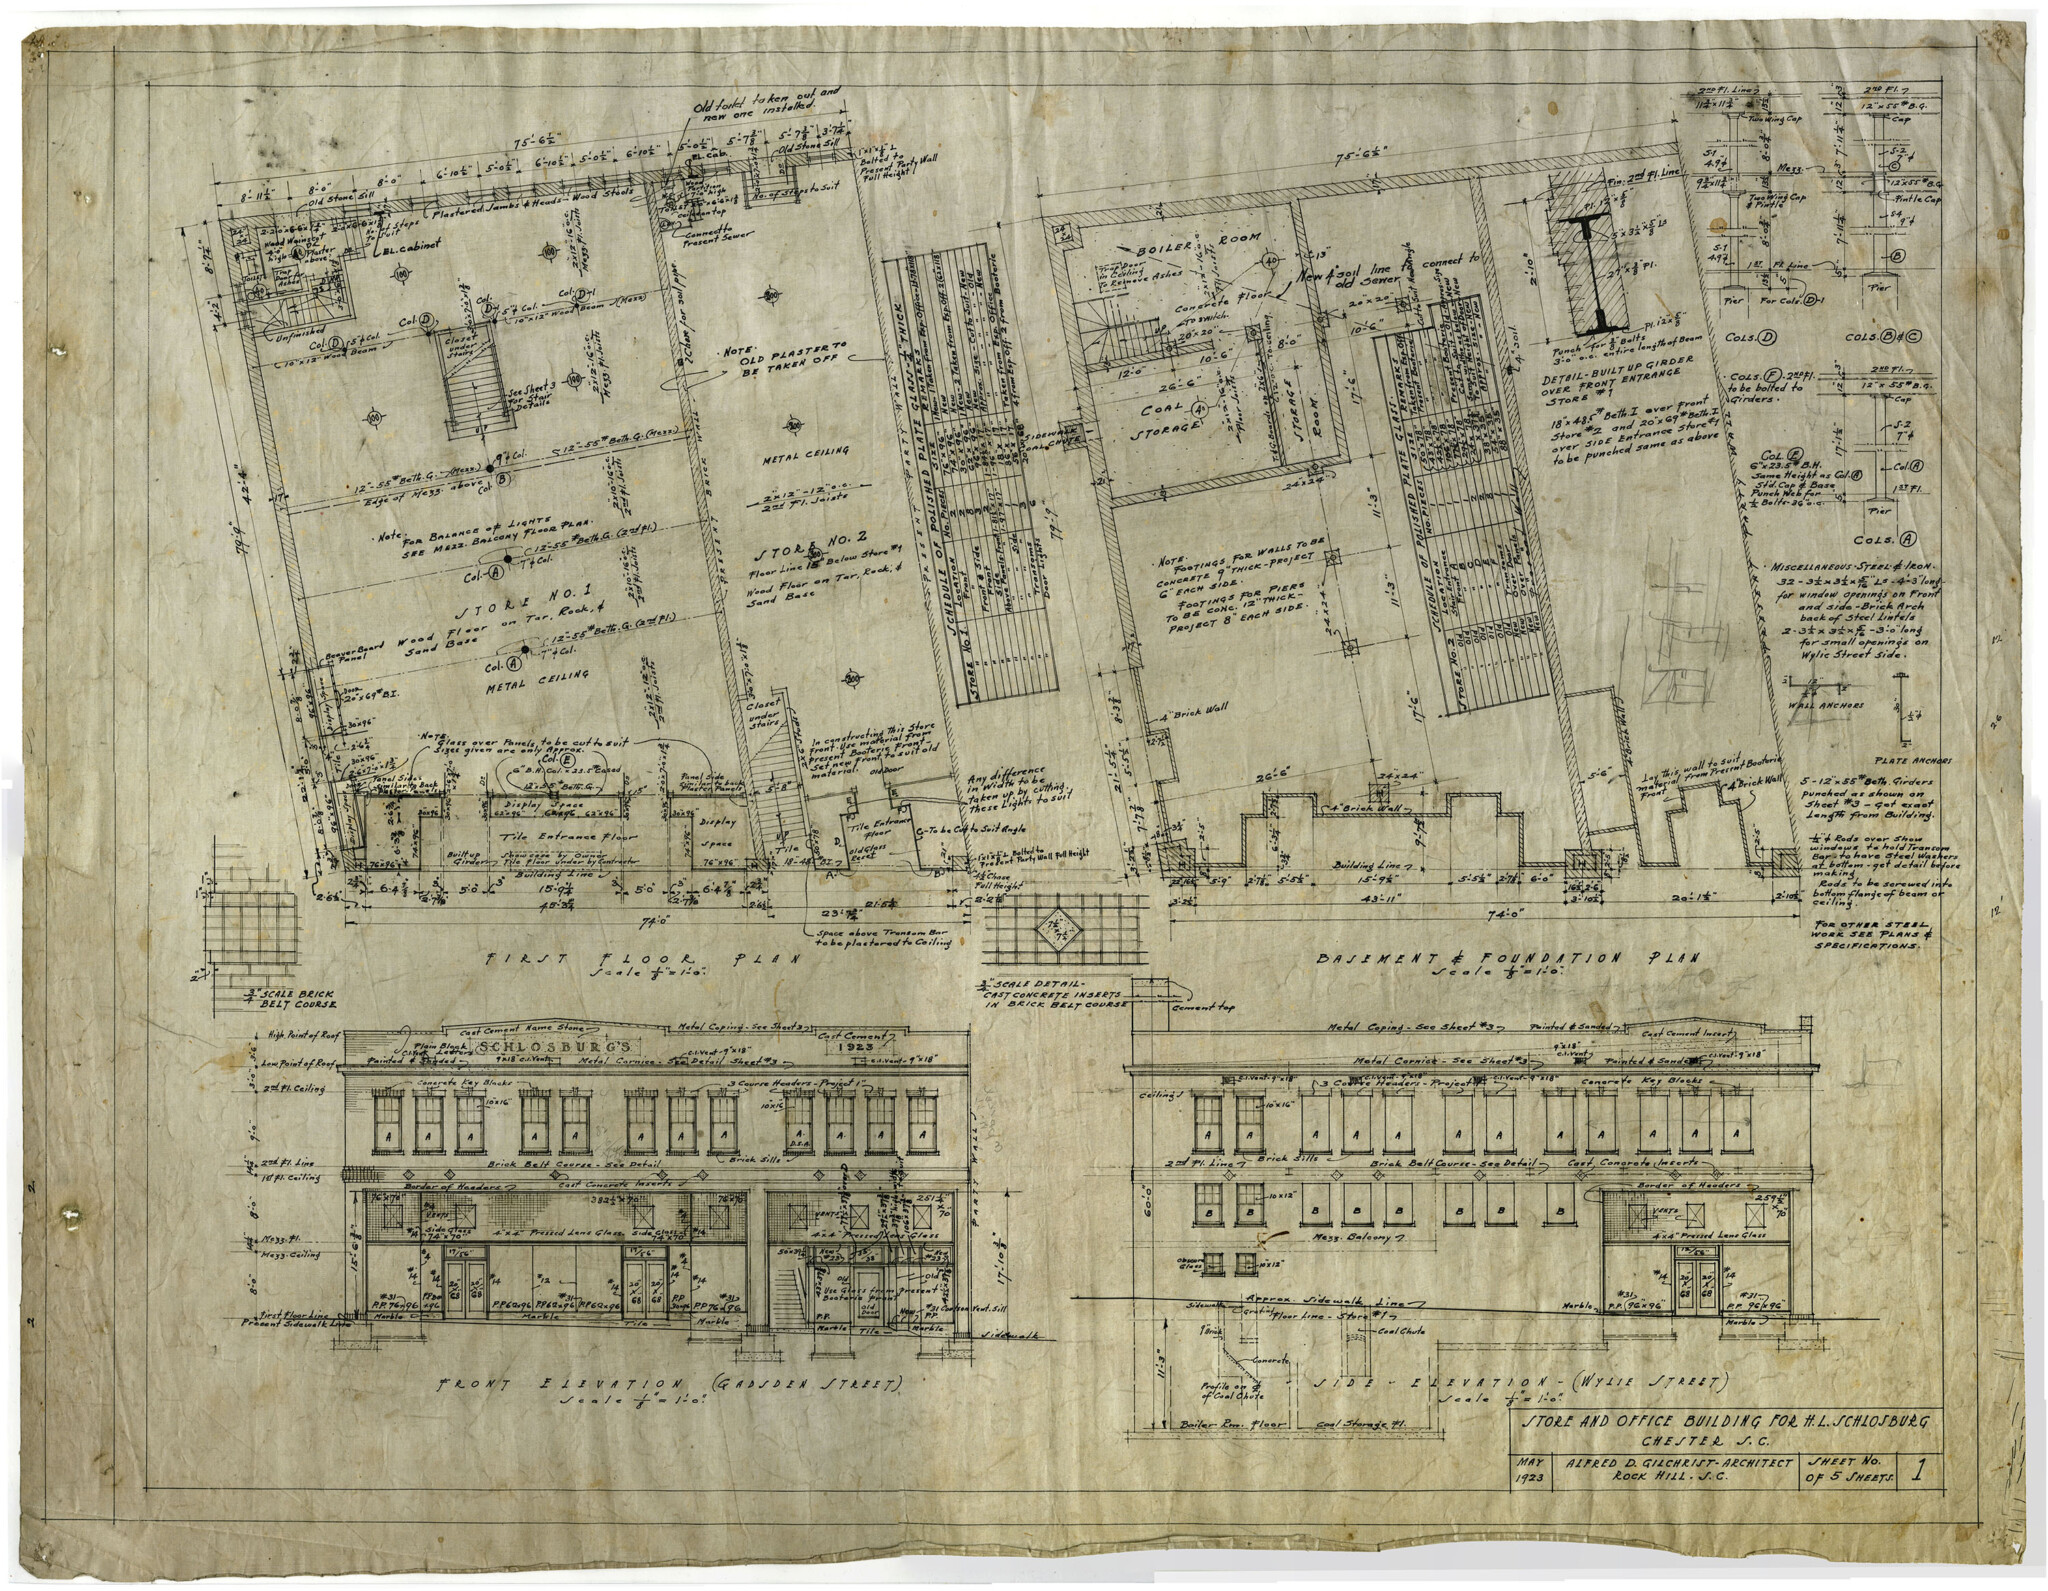 Architectural plans by A.D. Gilchrist of Rock Hill, S.C. - Courtesy of the WU Pettus Archives Collection, 2024